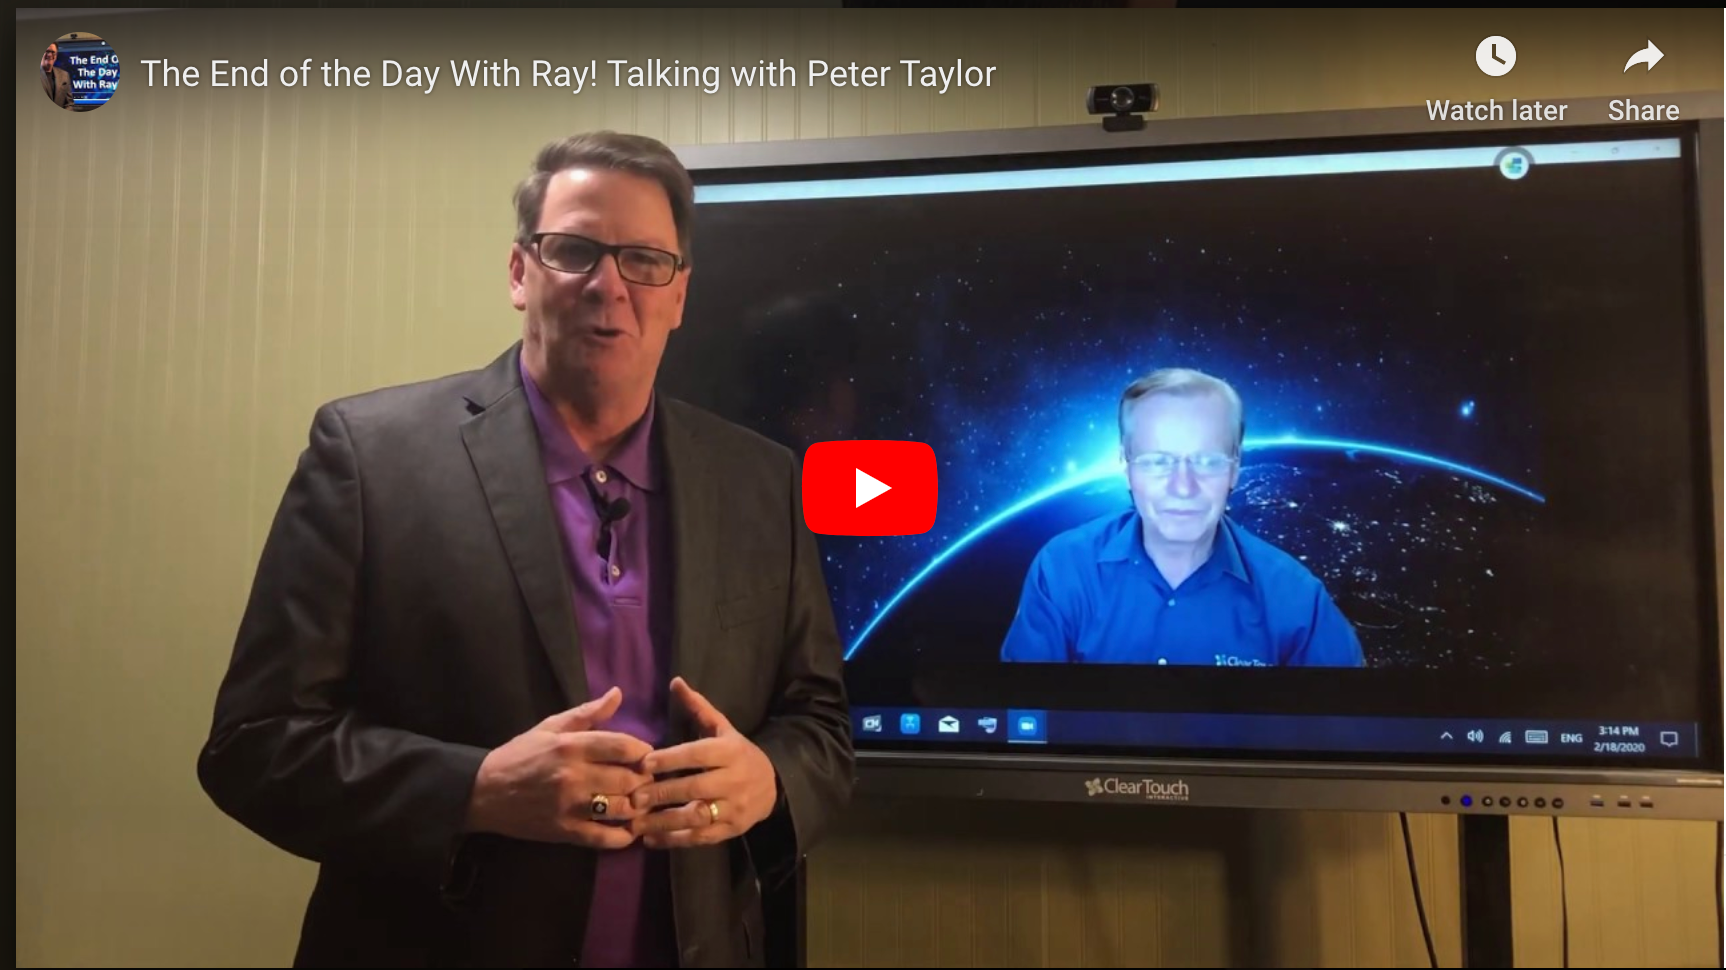 The End of the Day With Ray! Talking with Peter Taylor